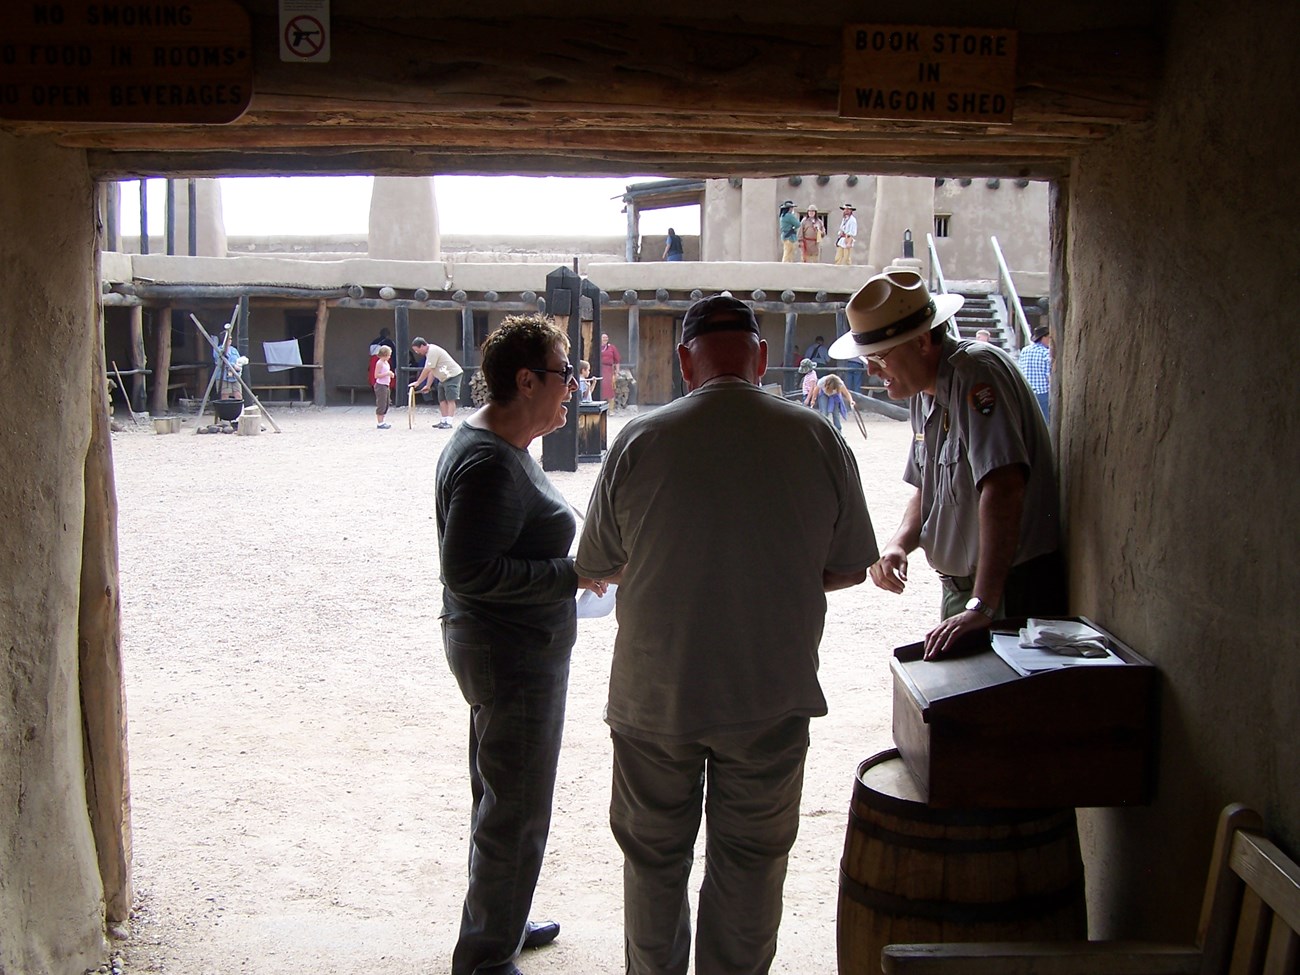 A park ranger interacts with visitors as they enter the plaza at Bent's Old Fort.